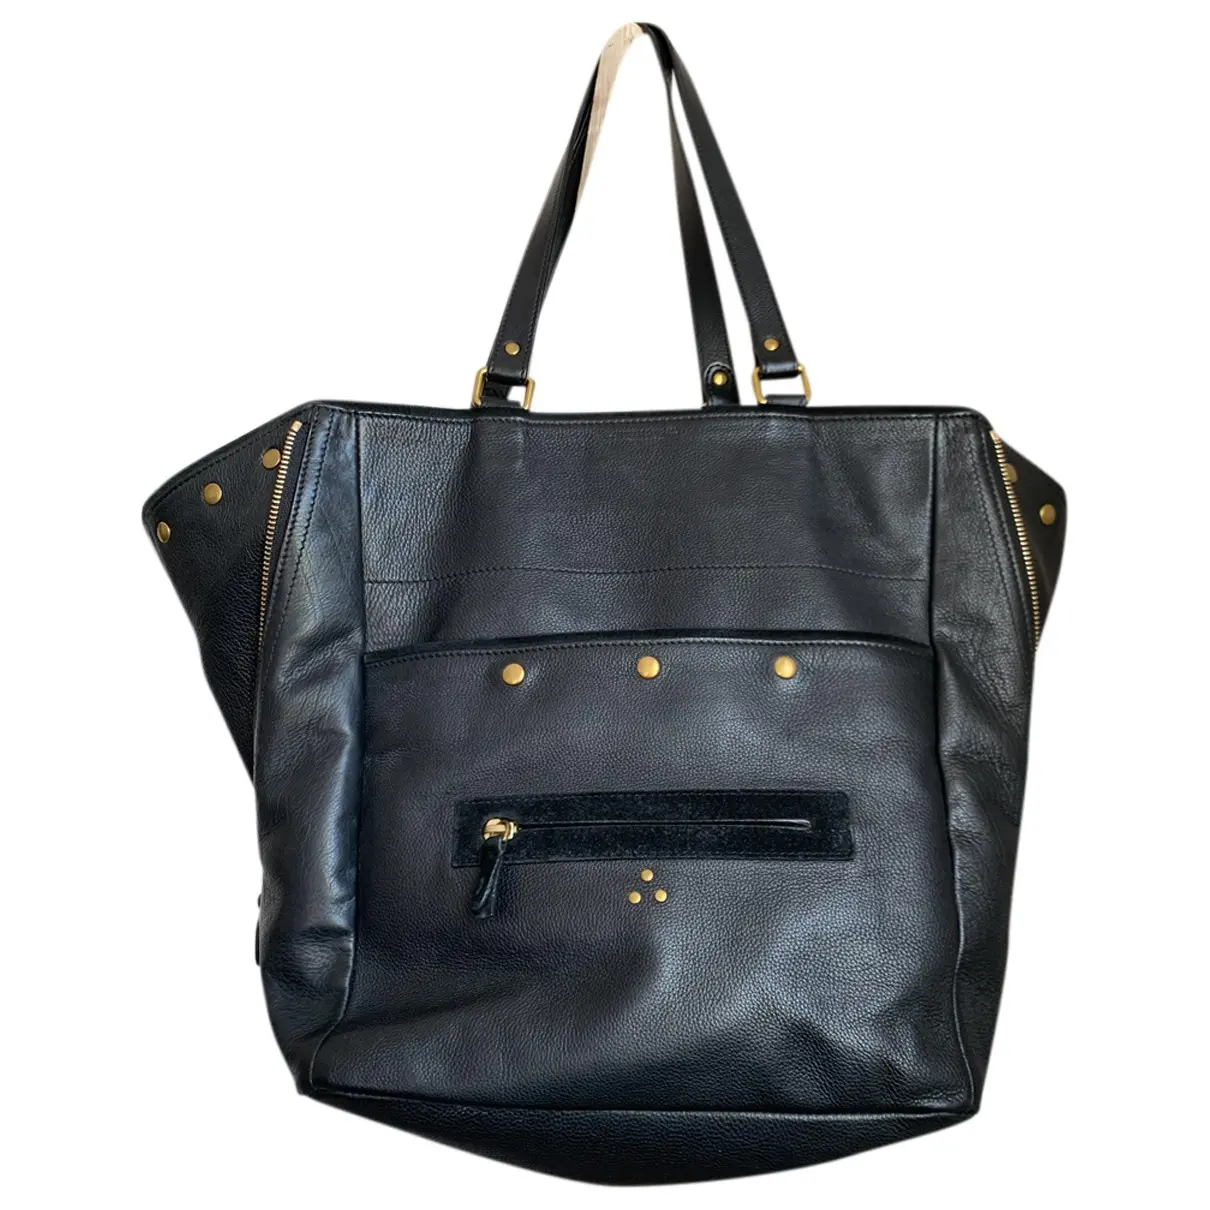 Leather tote Jerome Dreyfuss